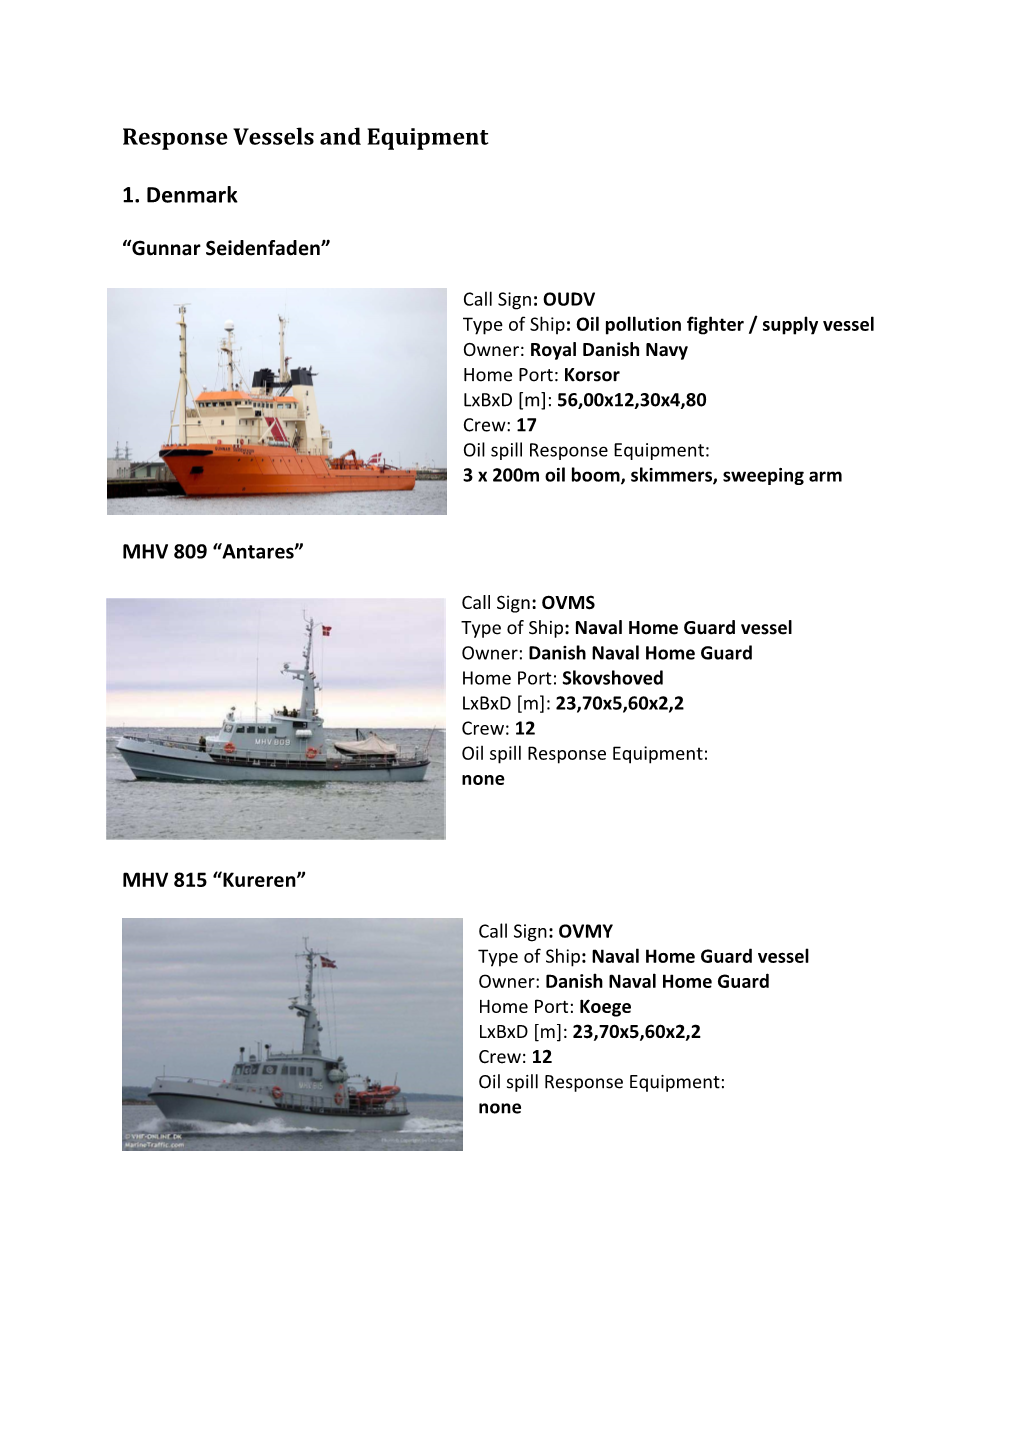 Annex Vessels and Equipment